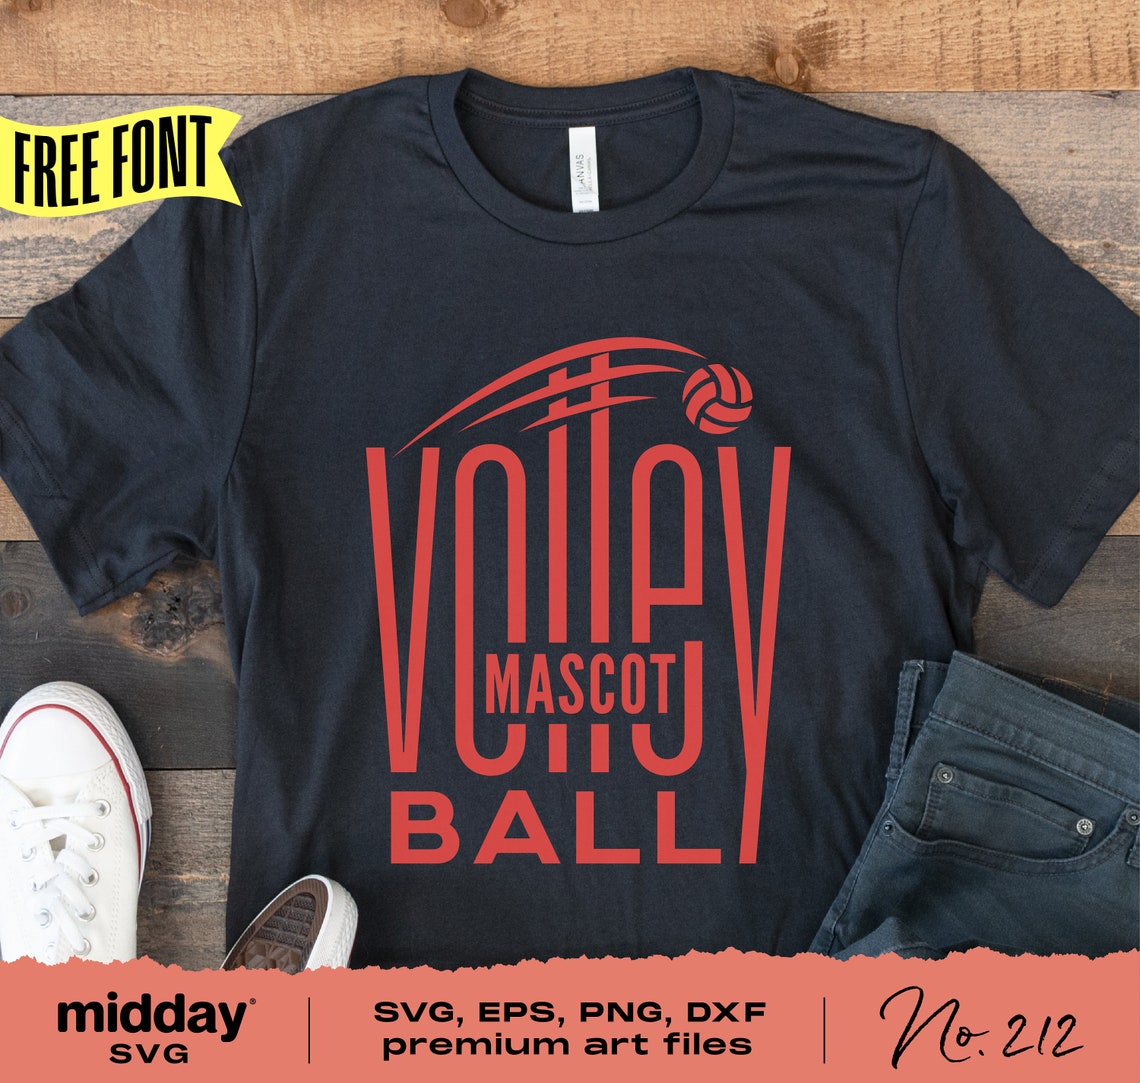 Volleyball Team Template Svg Png Dxf Eps Volleyball Team - Etsy